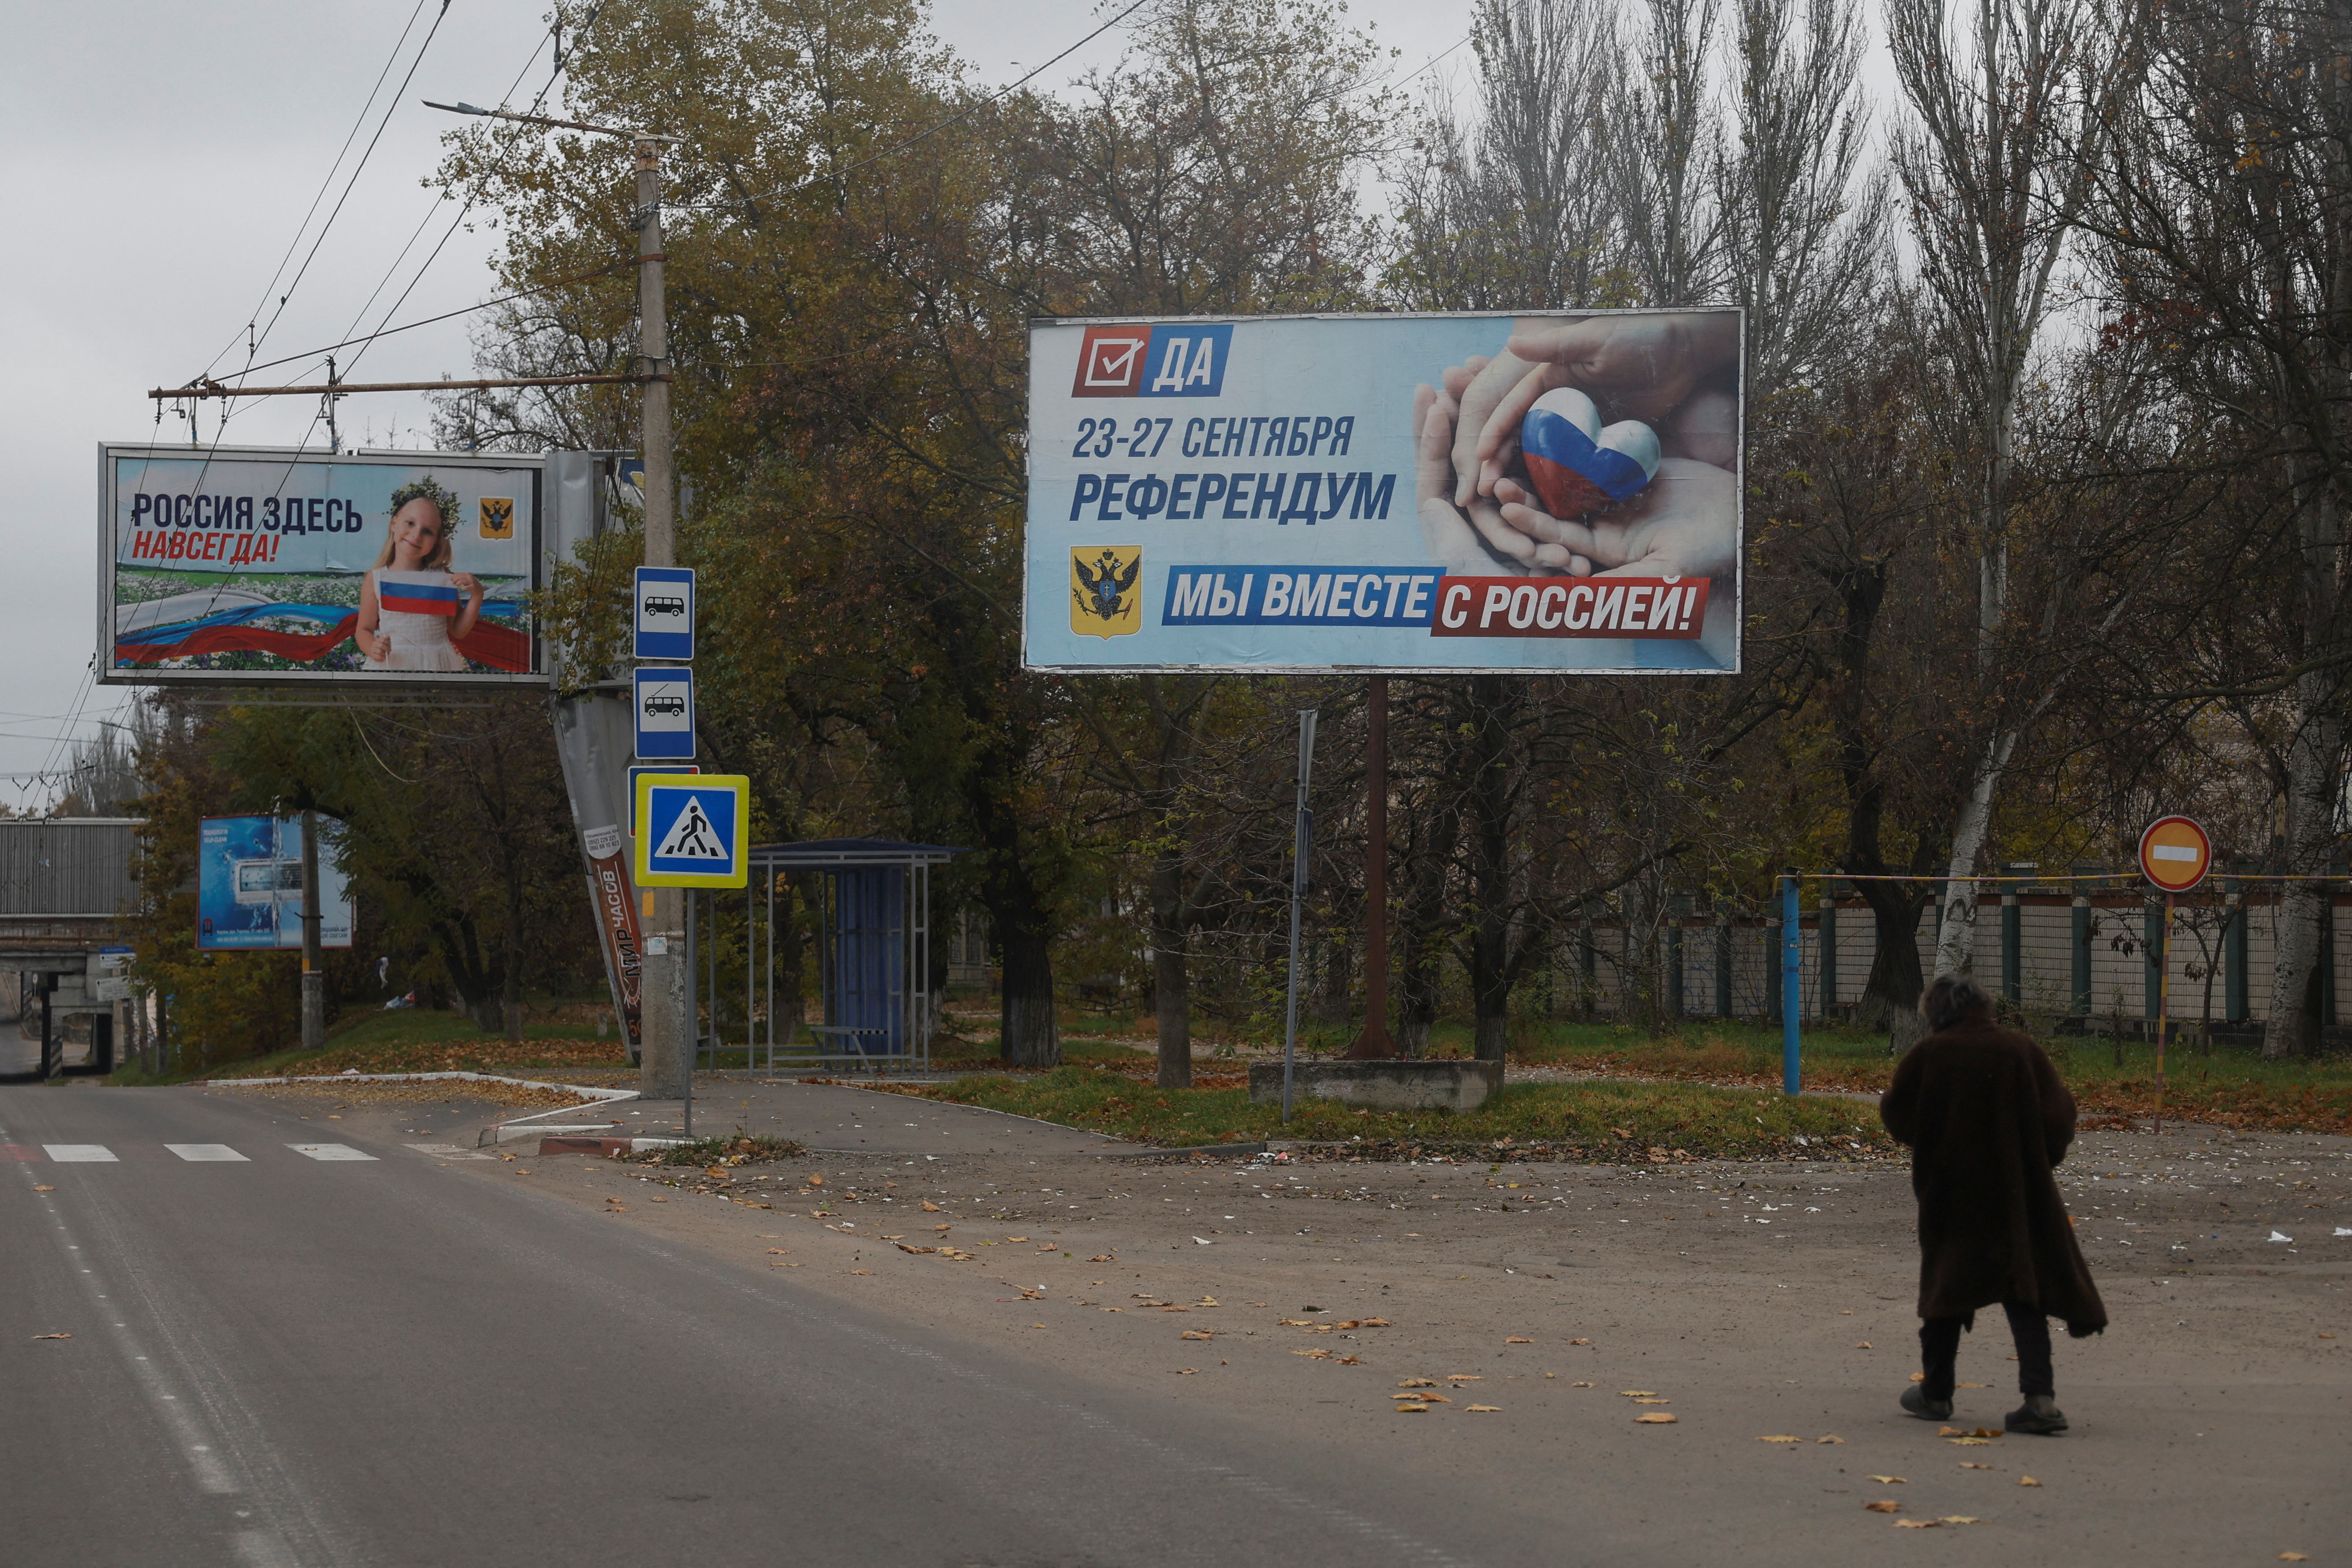 Local woman walks next to banners with Russian propaganda after Russia's retreat from Kherson, in Kherson